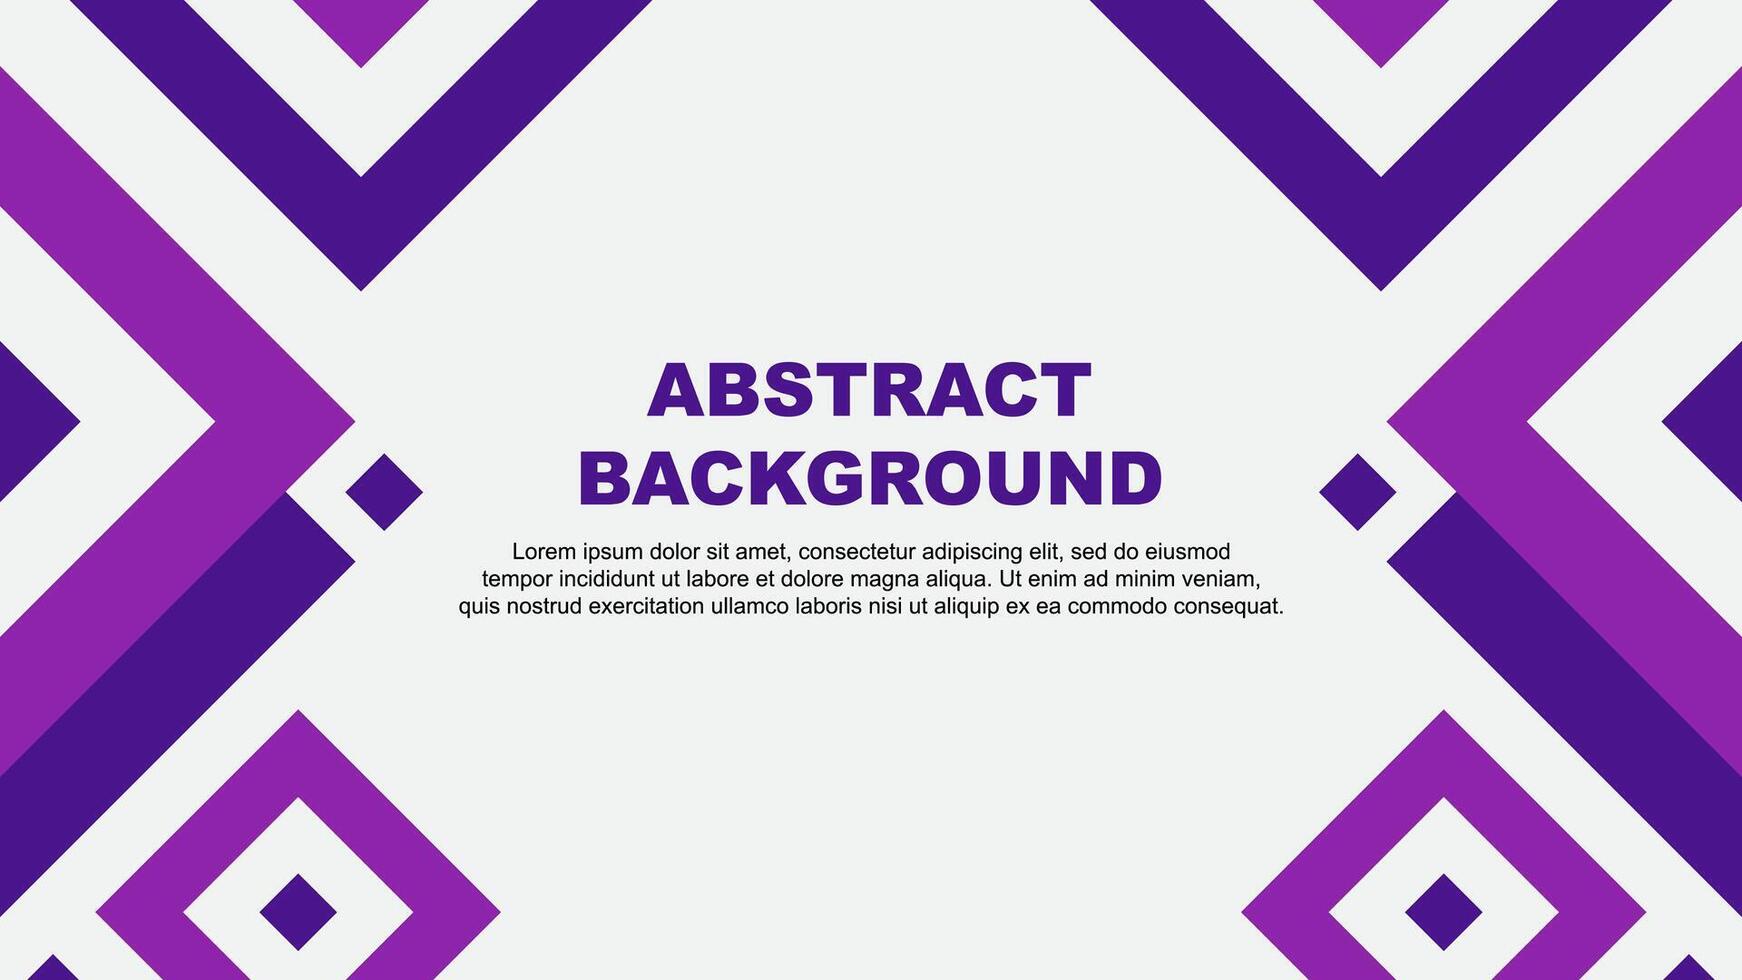 Abstract Purple Background Design Template. Abstract Banner Wallpaper Illustration. Purple Template vector